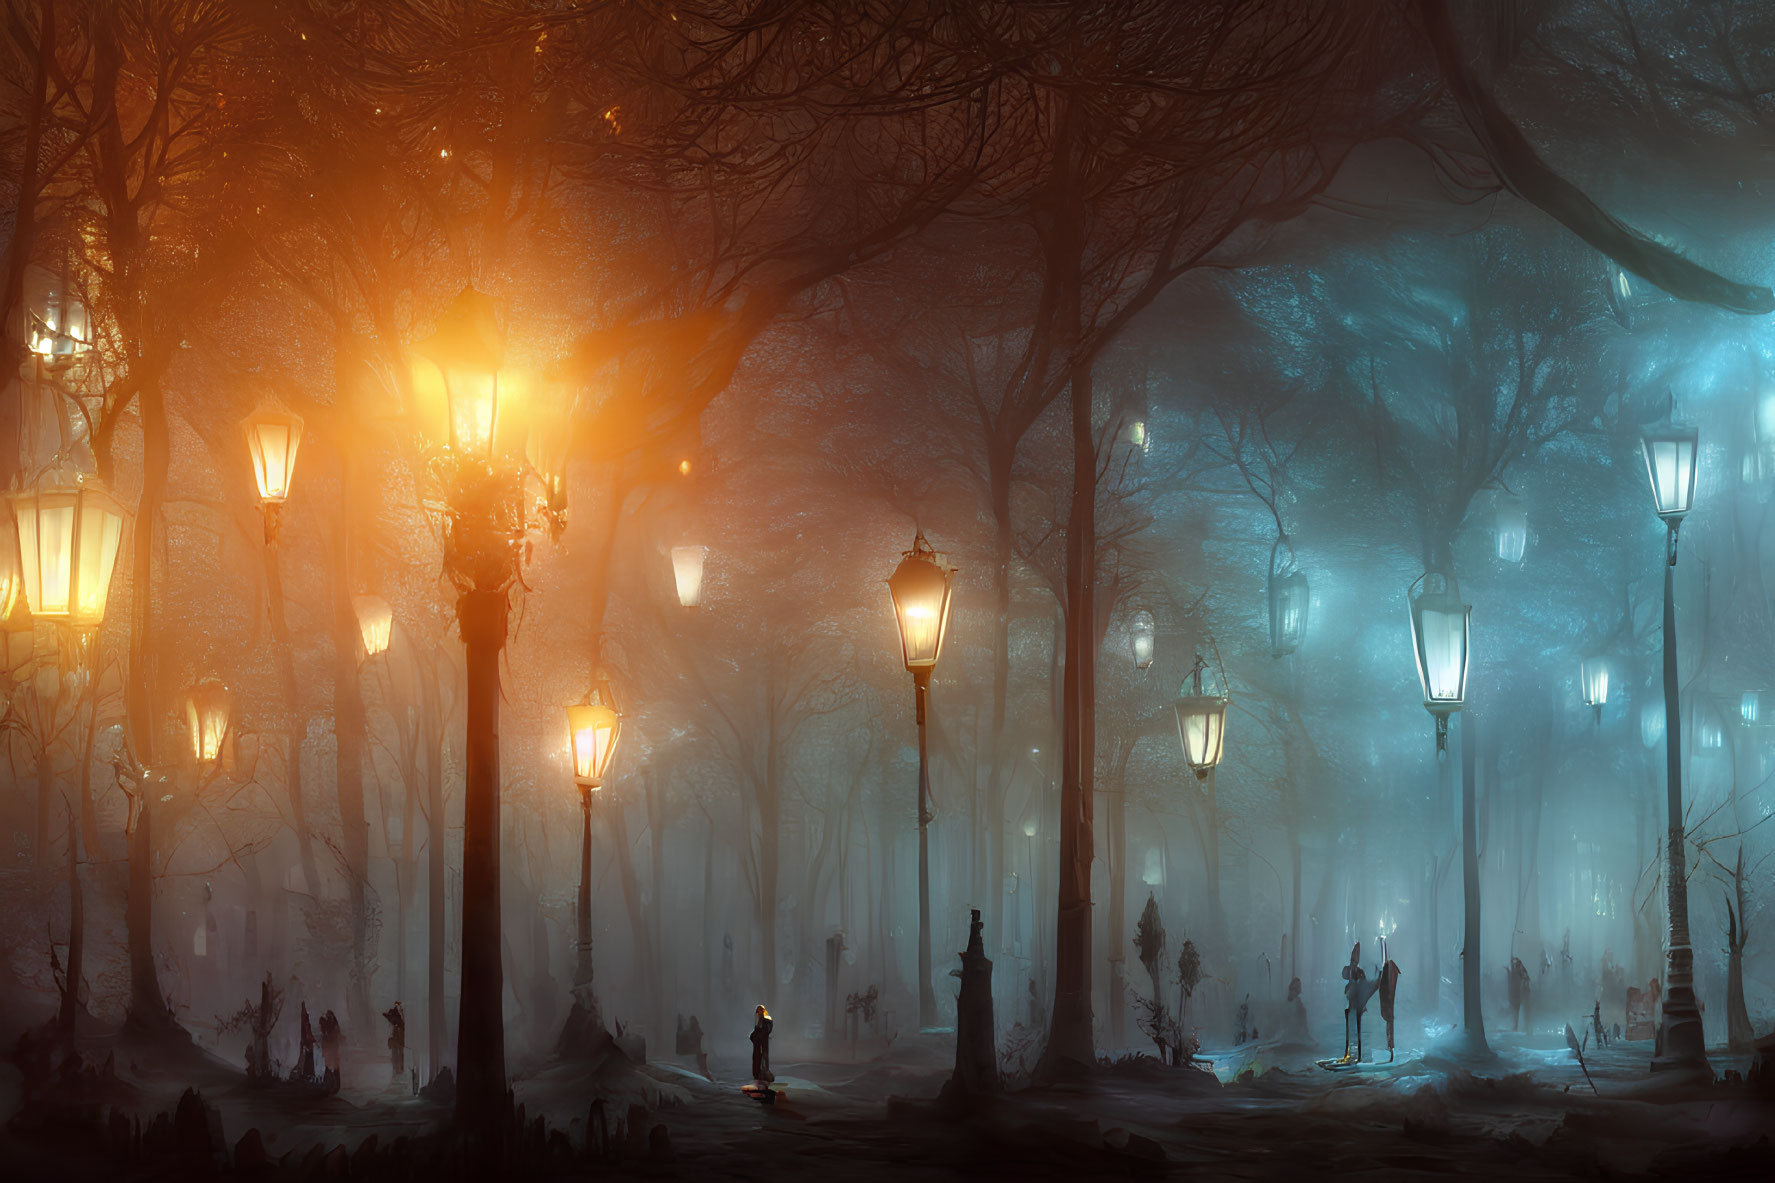 Mystical foggy forest with glowing street lamps and statues in embrace